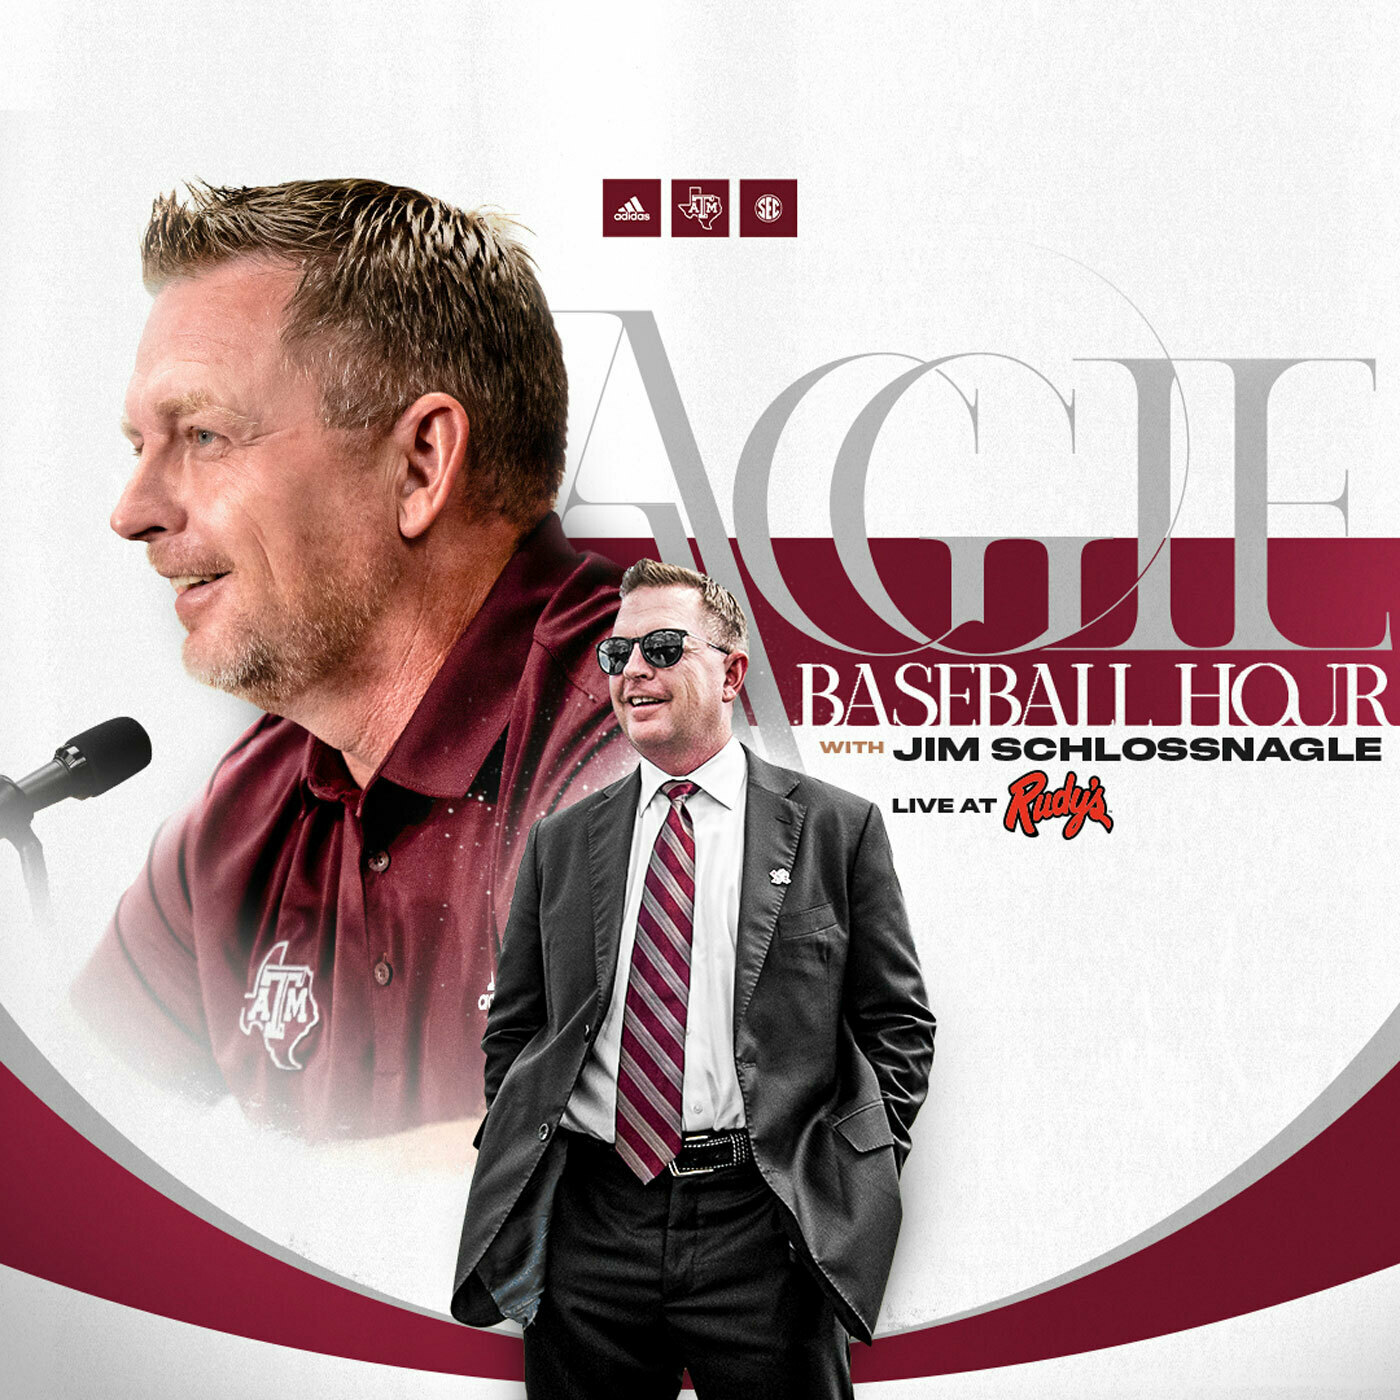 The Aggie Baseball Hour Episode 4